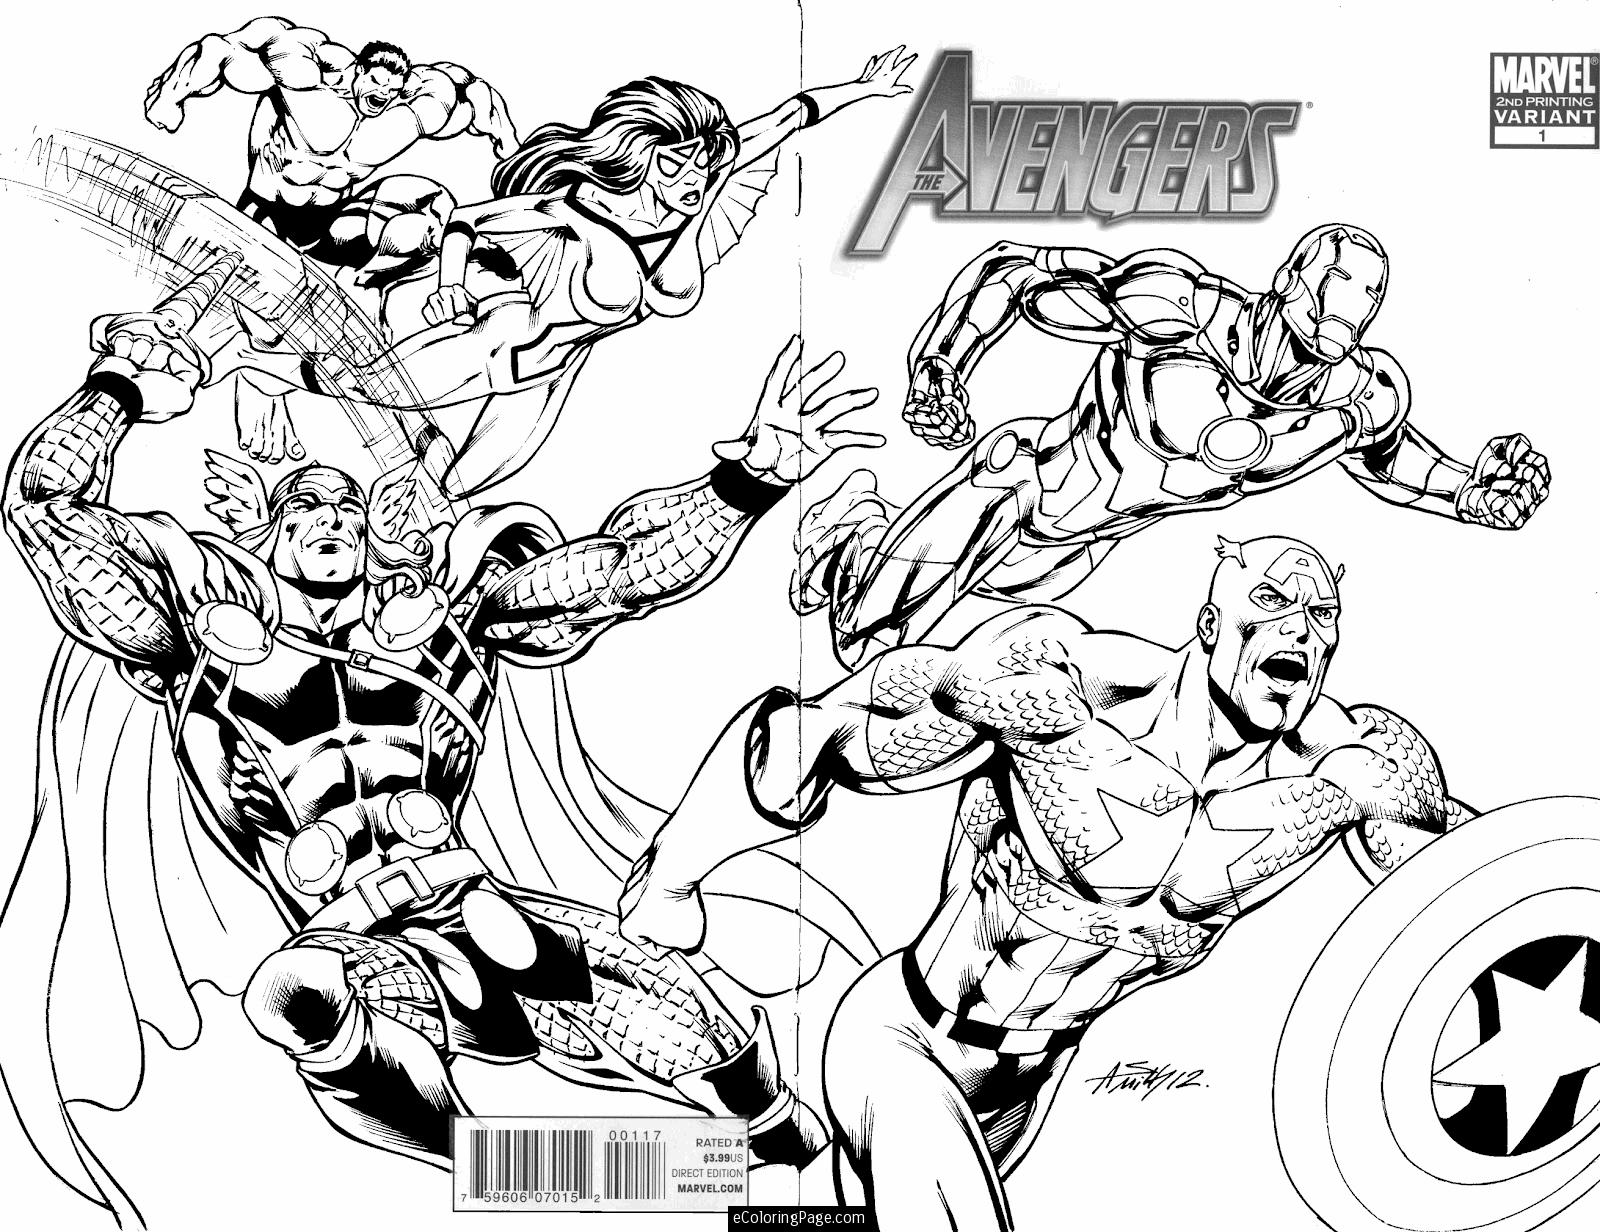 Avengers coloring pages to download and print for free